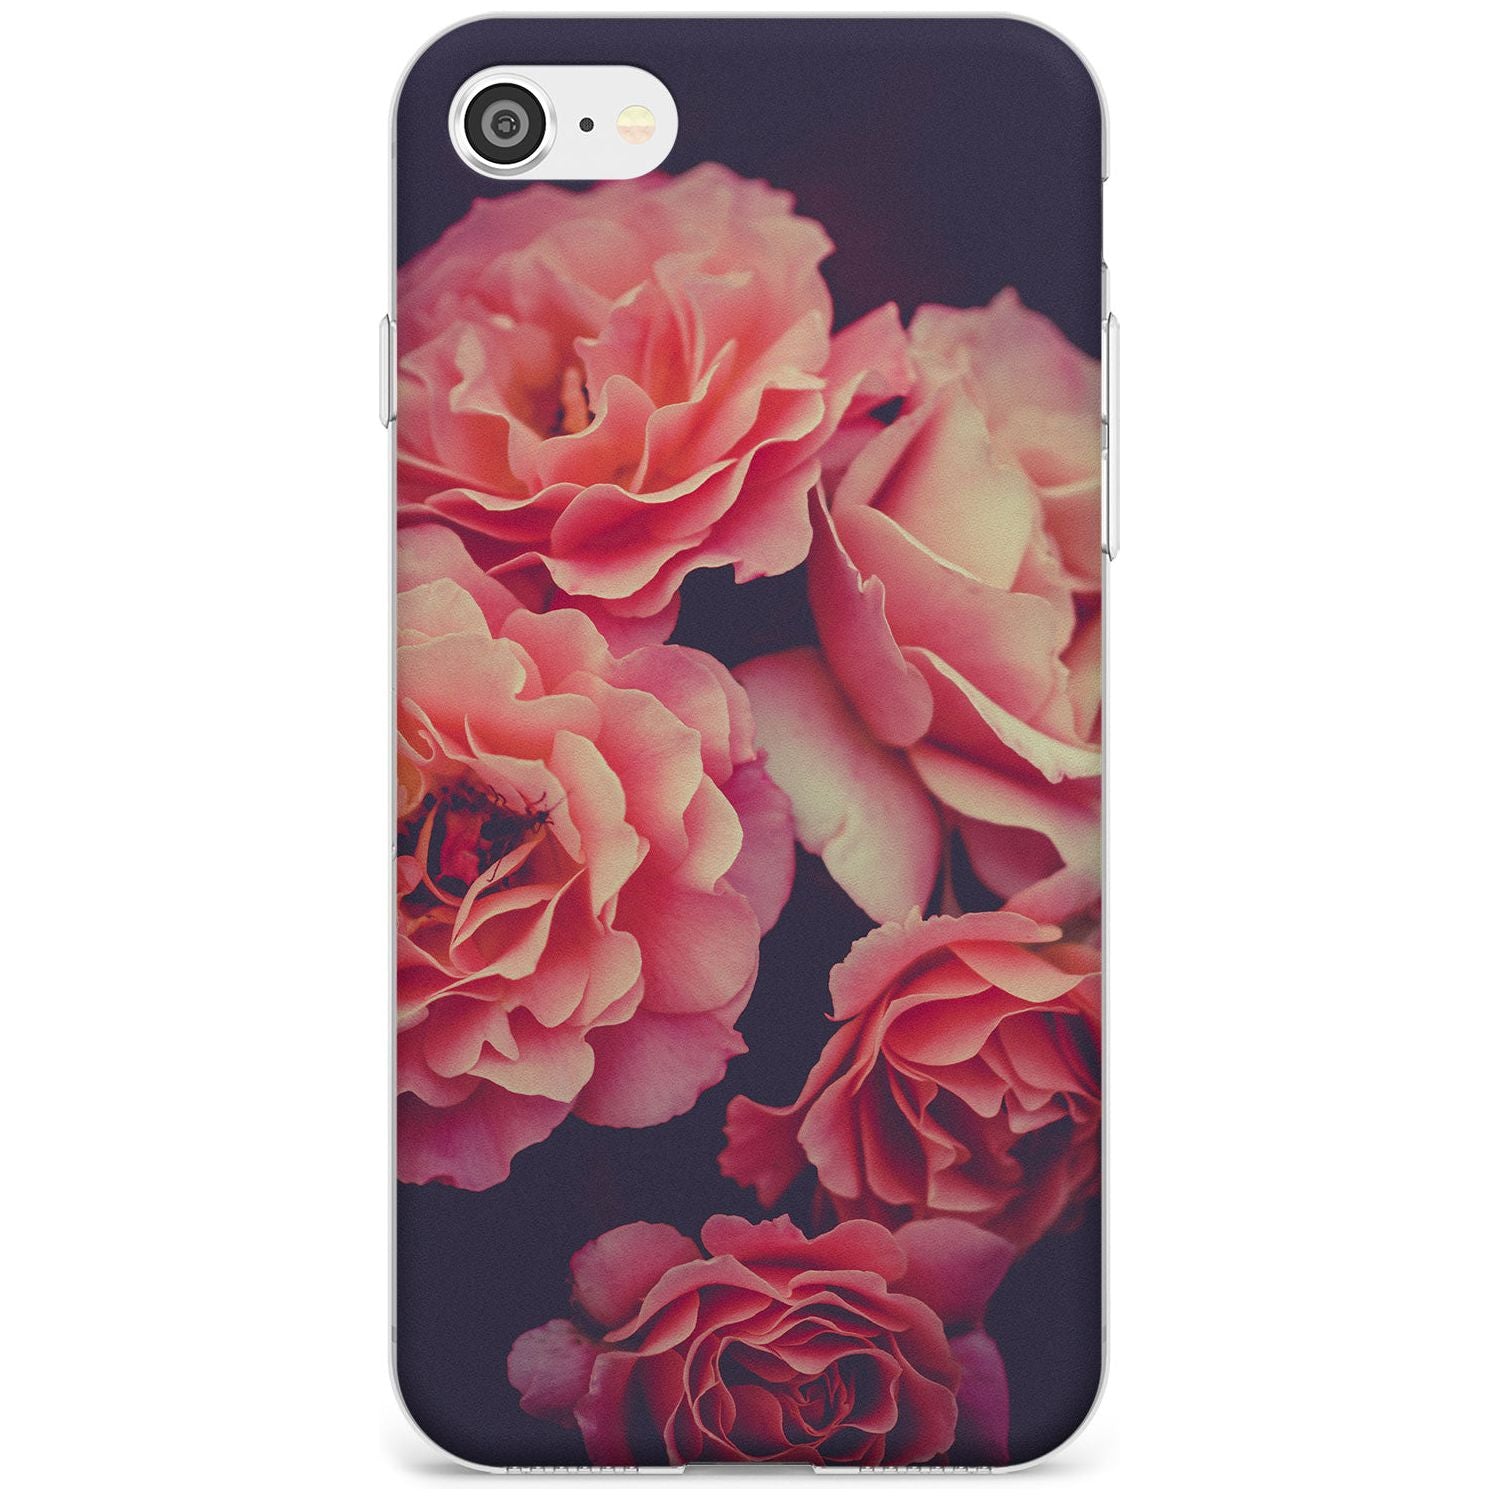 Pink Roses Photograph Slim TPU Phone Case for iPhone SE 8 7 Plus